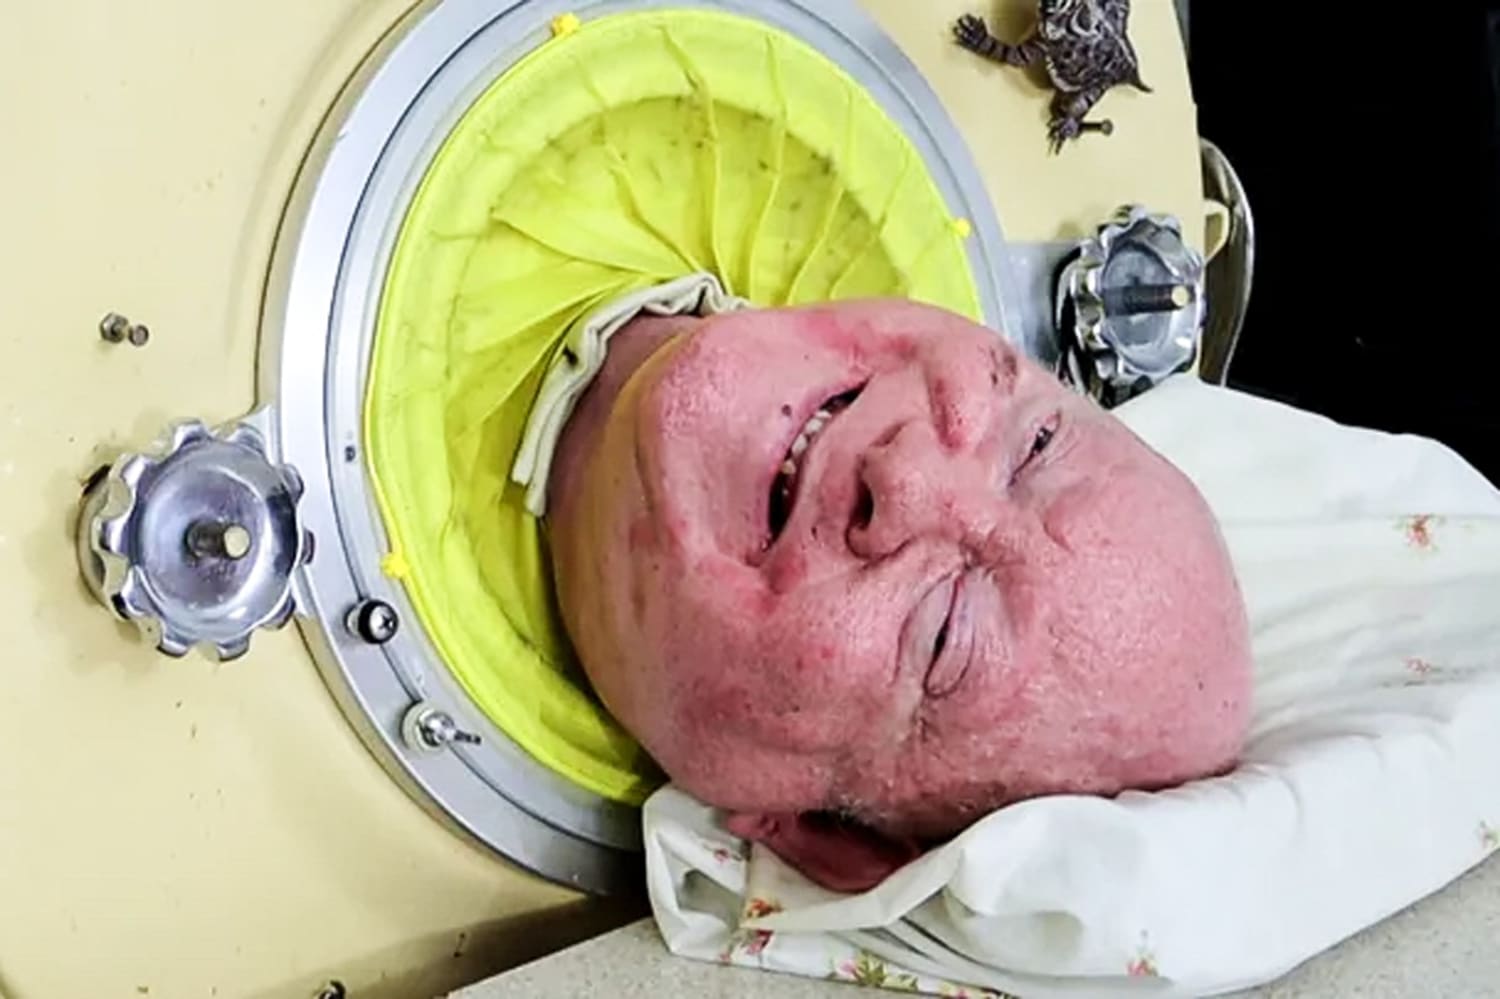 Paul Alexander, polio survivor in iron lung for over 70 years ...